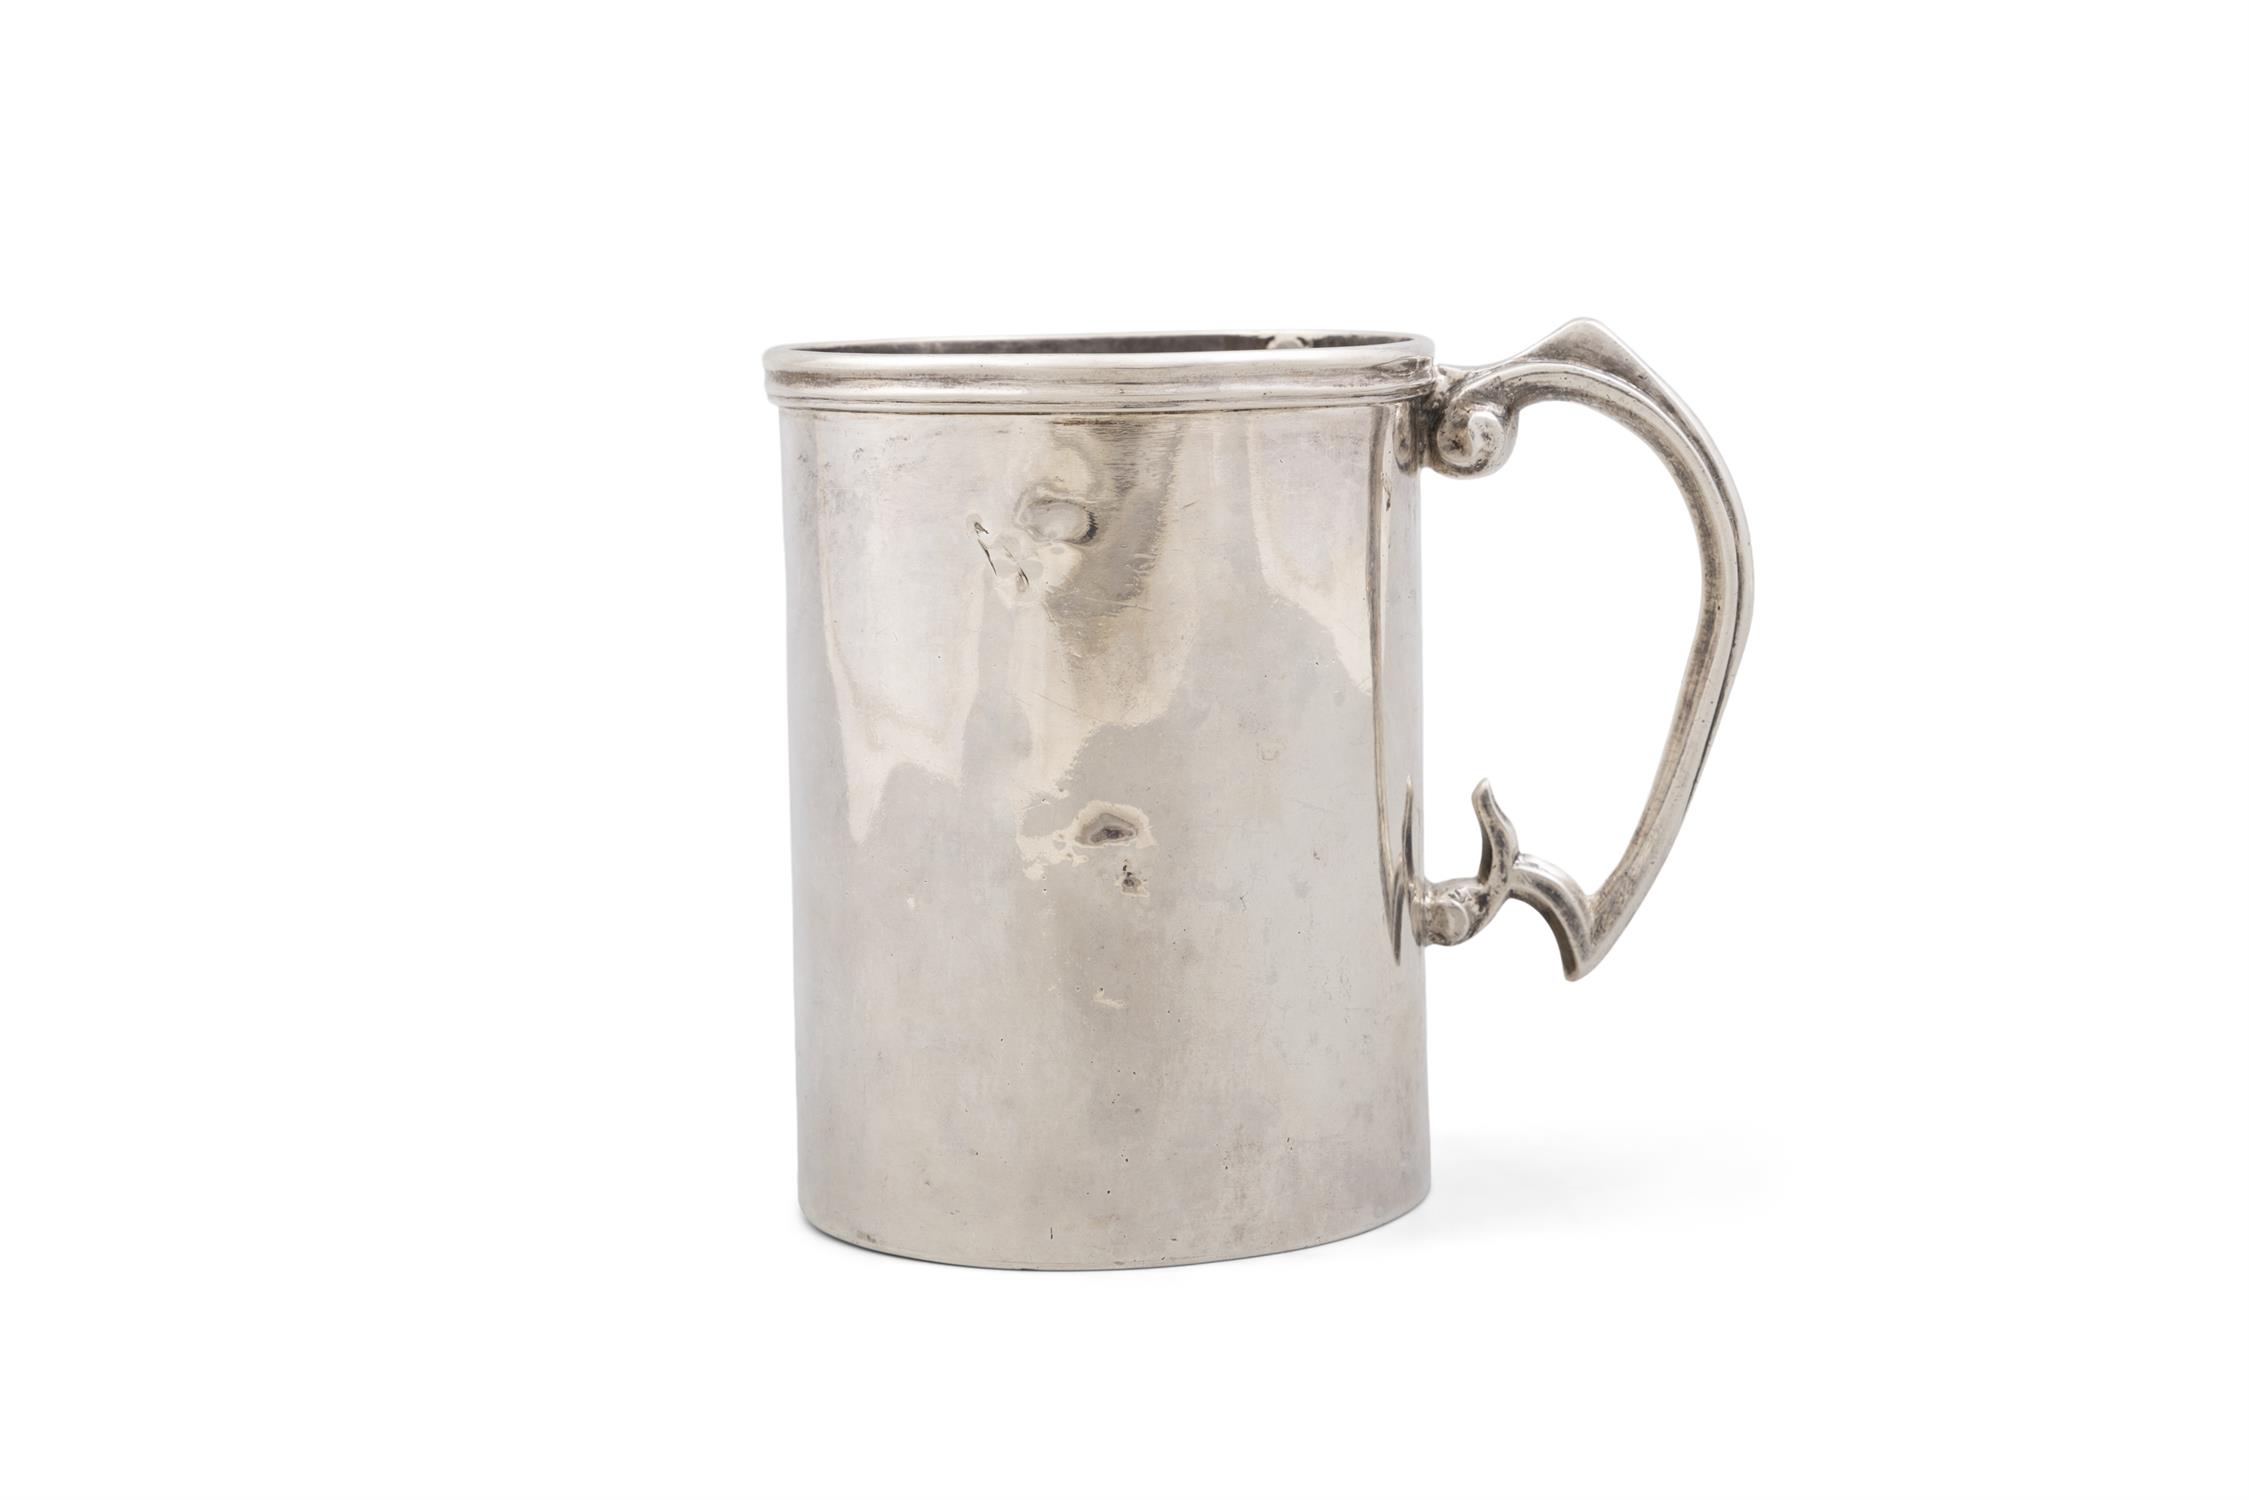 A PROVINCIAL IRISH SILVER BEER TANKARD, with 'P. R.' marking at the base. (17.82 troy oz) 12.